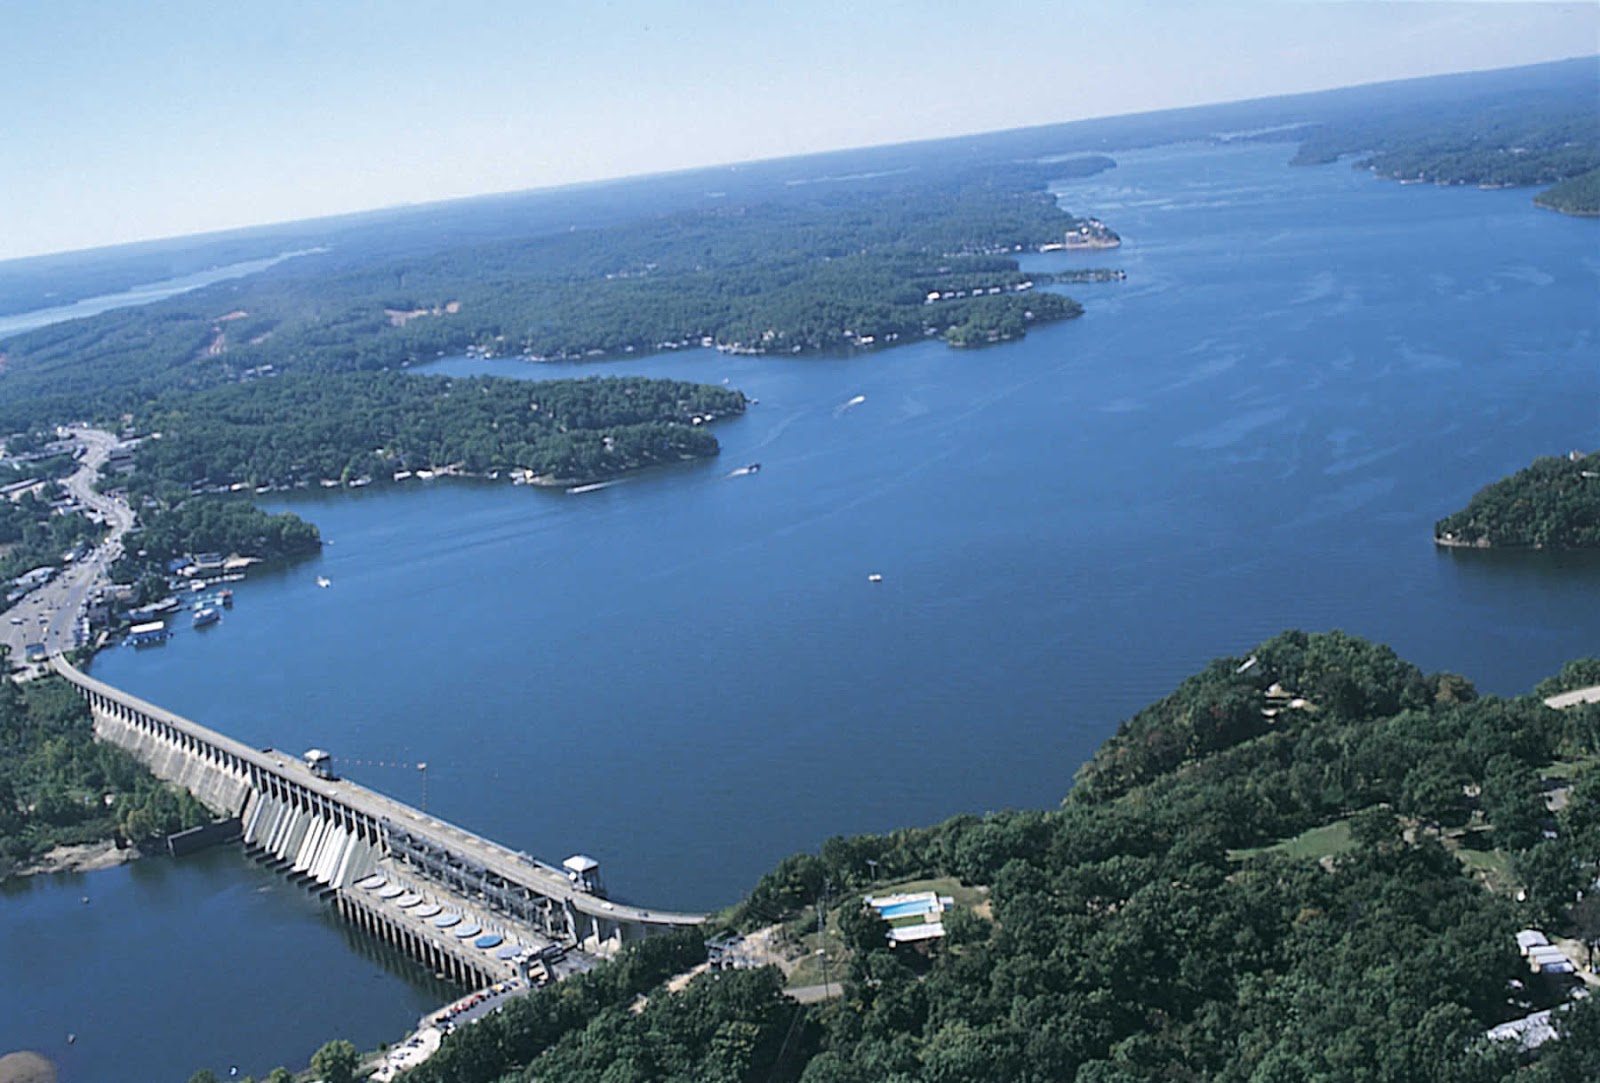 11 Fun Facts About The Lake of the Ozarks